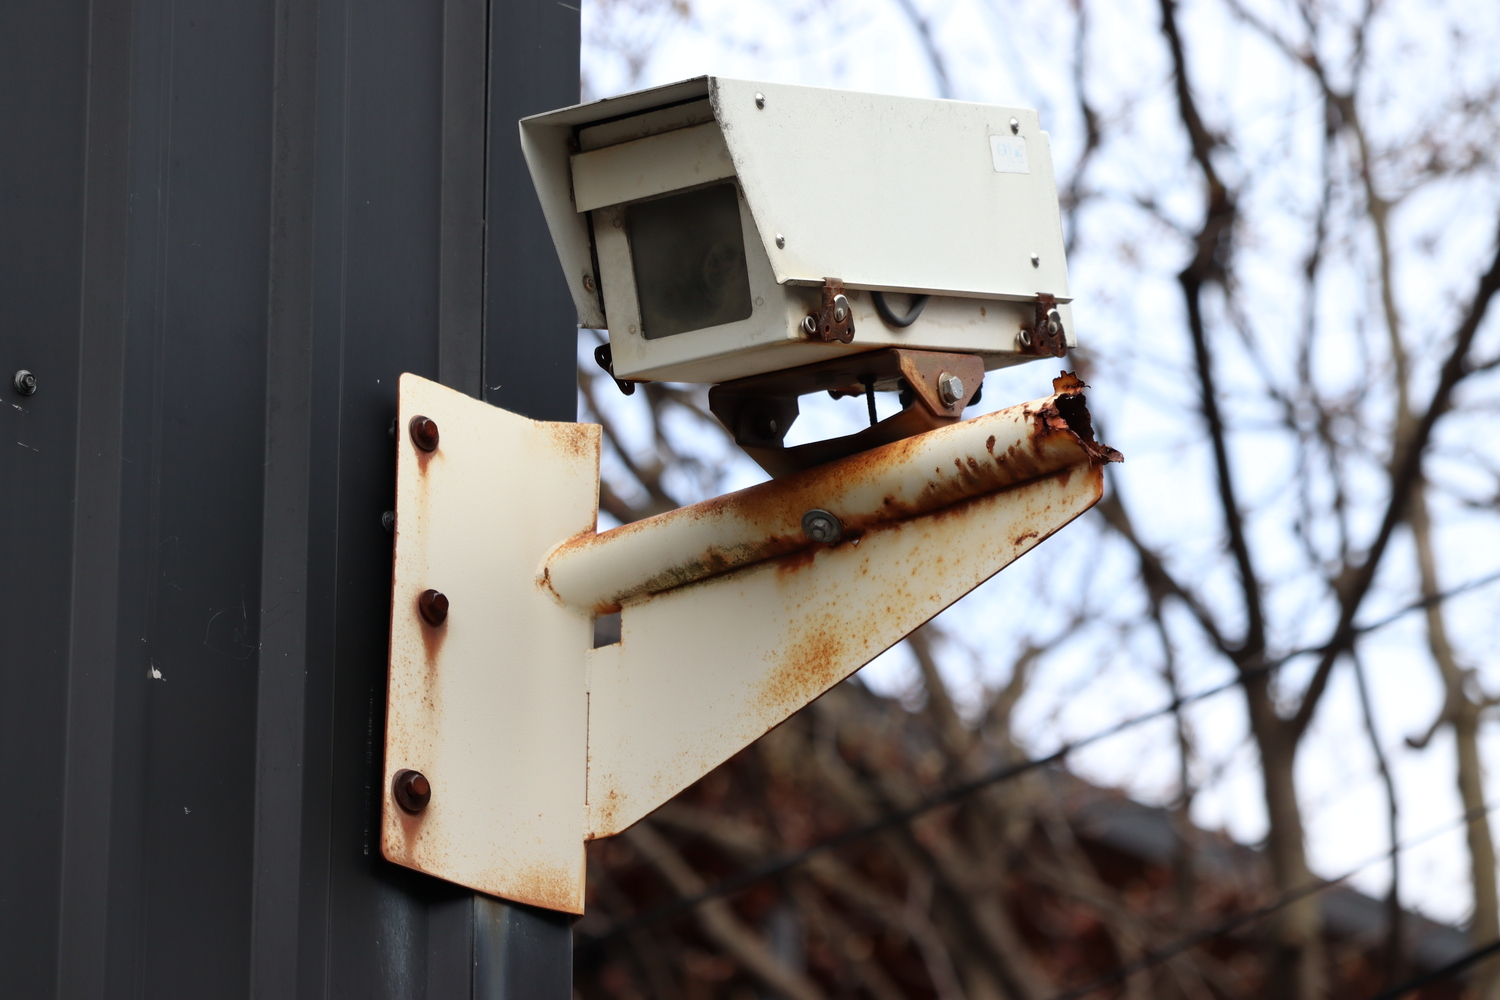 a CCTV camera on the corner
of a black corrugated metal building.
it's mounted on a beige rusting bracket
coming off the wall at a right angle.
it's an old-style boxy camera
with a little hood.
who knows if it's still connected to anything?